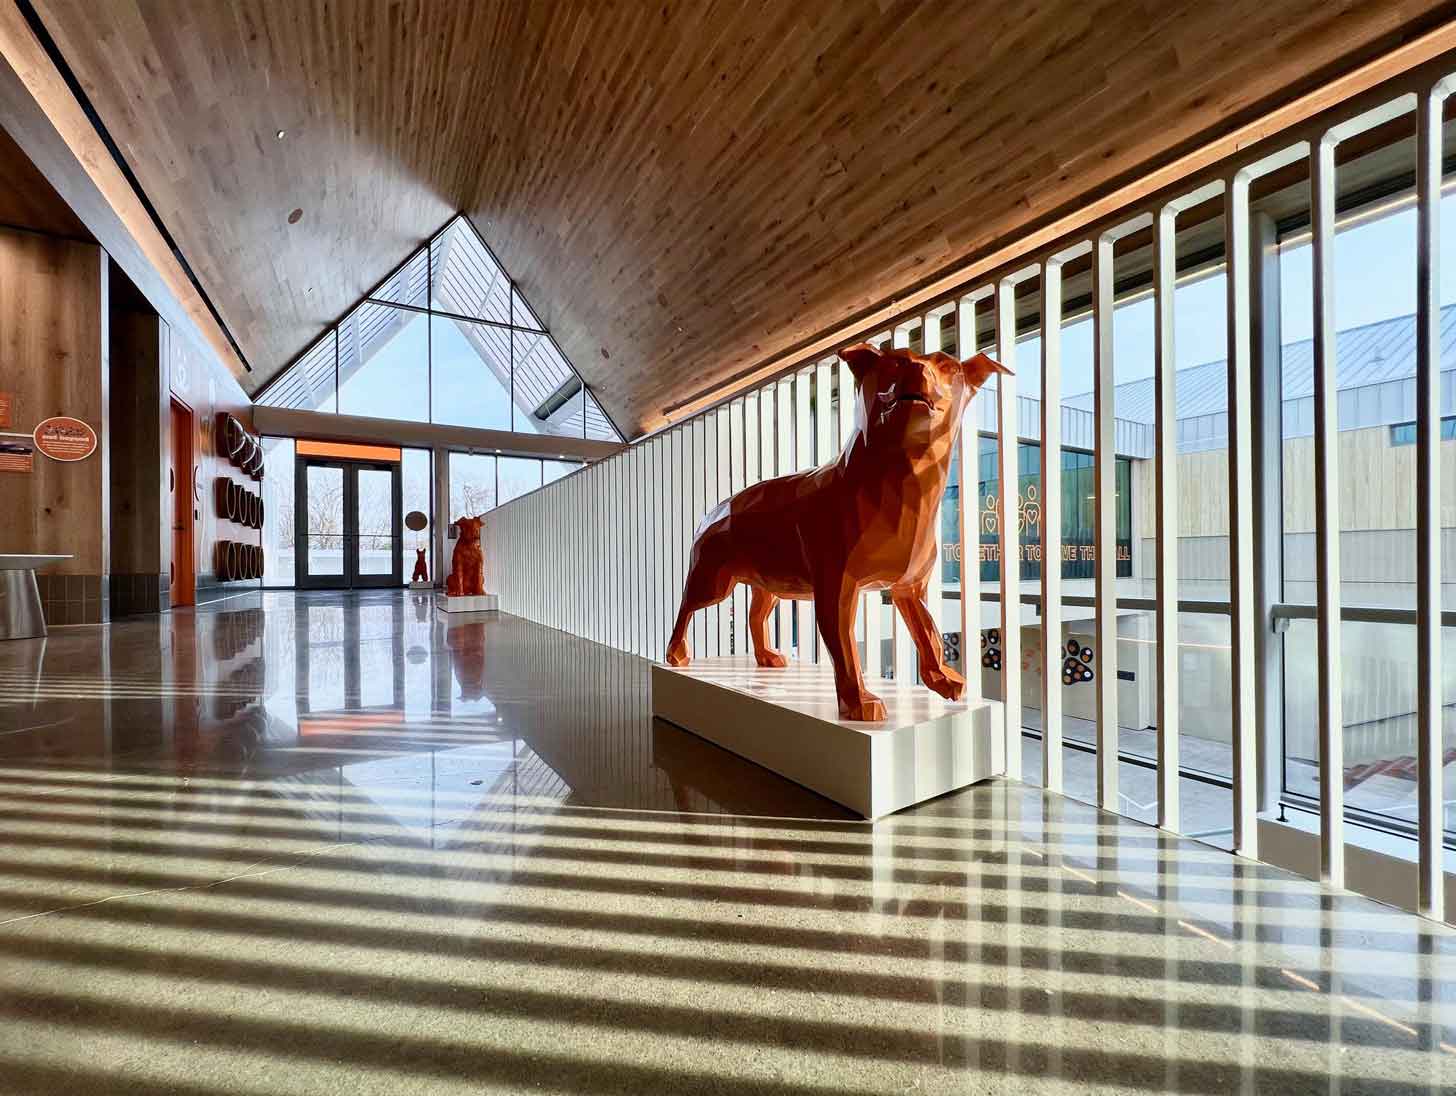 Lobby of the Best Friends Pet Resource Center, showing large sculptures of a dog